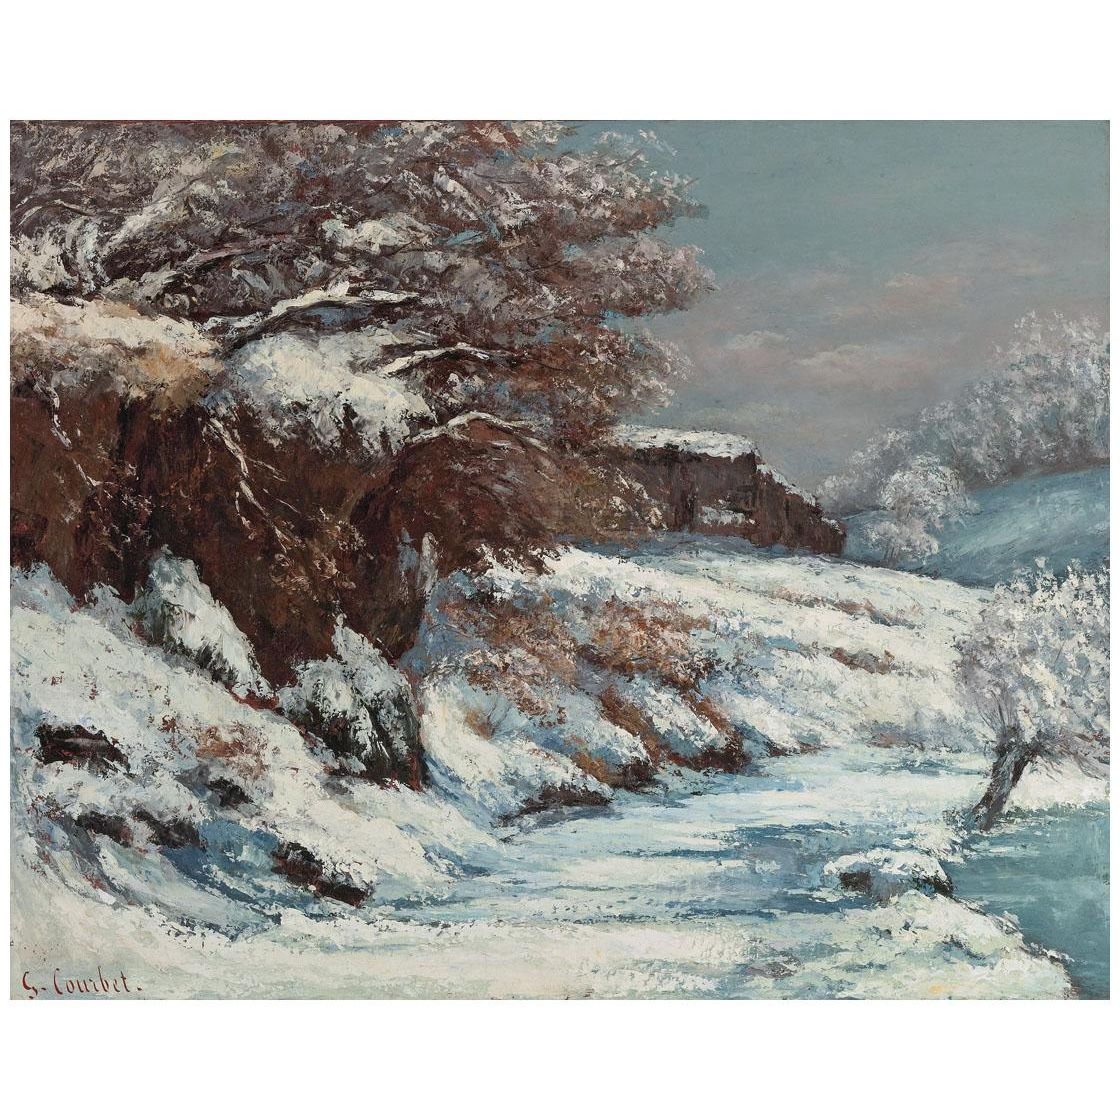 Gustave Courbet. Effet de neige. 1866. Private collection